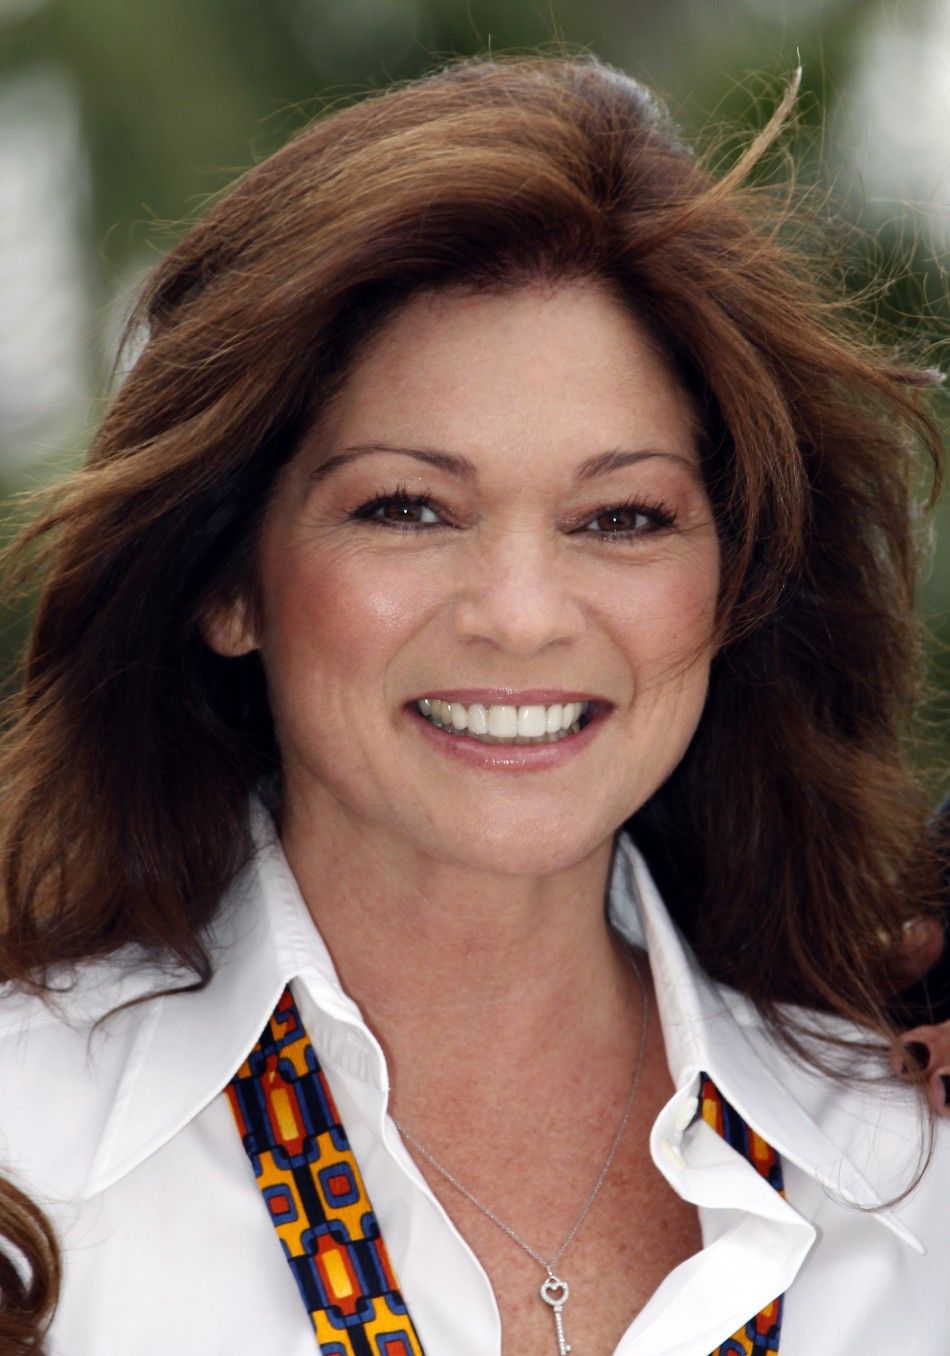 Valerie Bertinelli Gets Emotional Over Criticism About Her Weight You